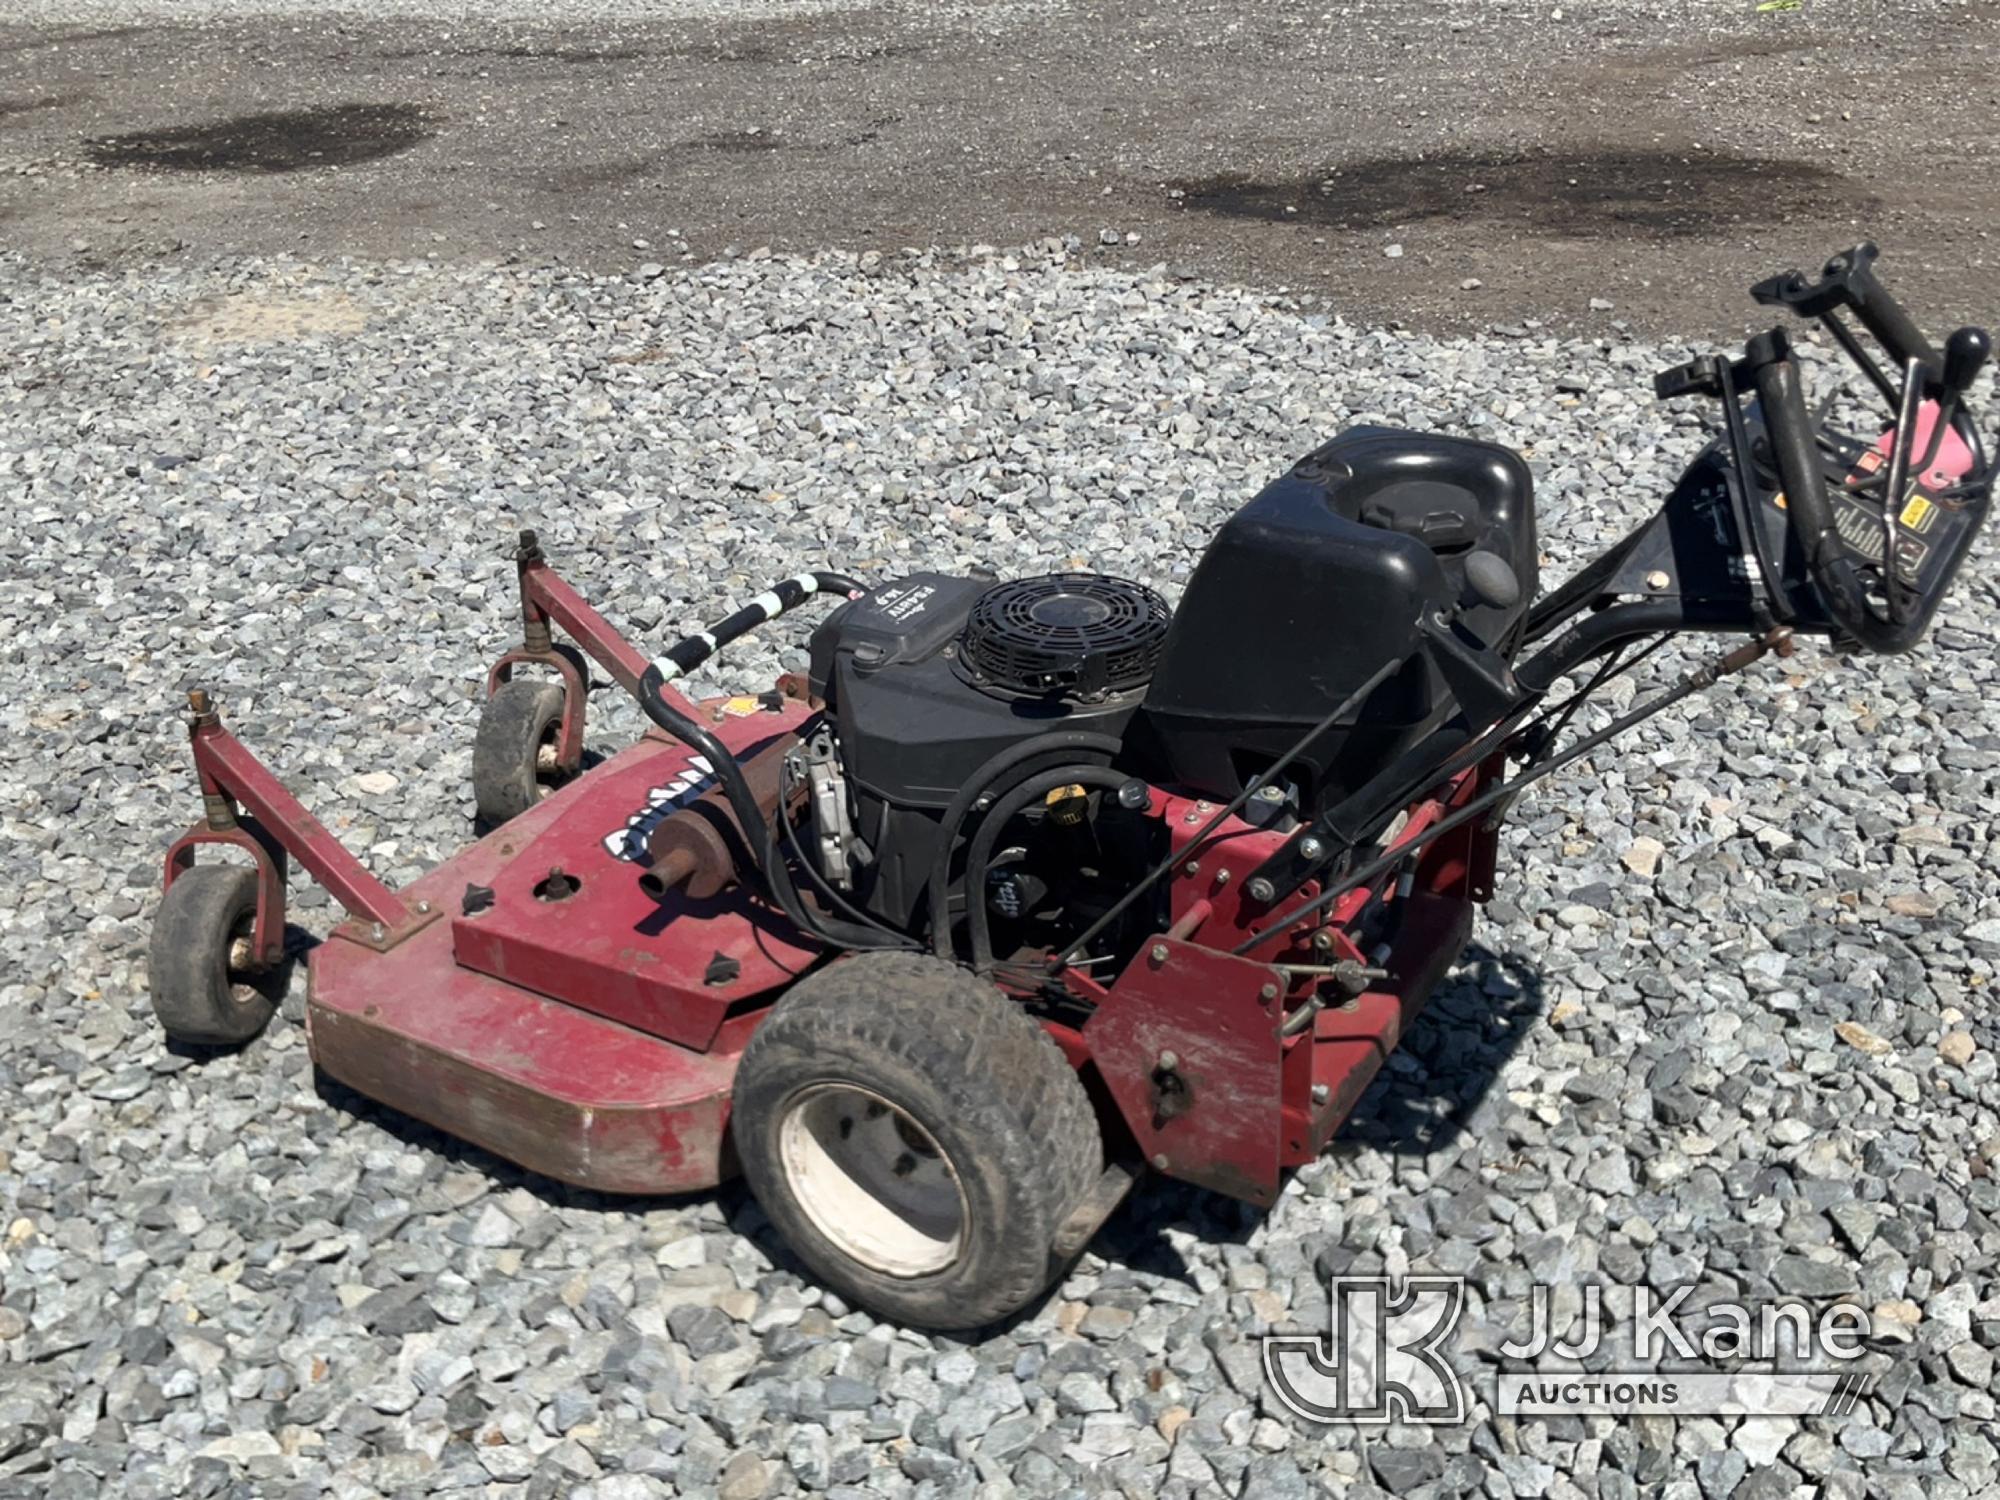 (Tacoma, WA) 2012 Exmark Lawn Mower Runs & Moves) Tires Are Fair, Everything Works